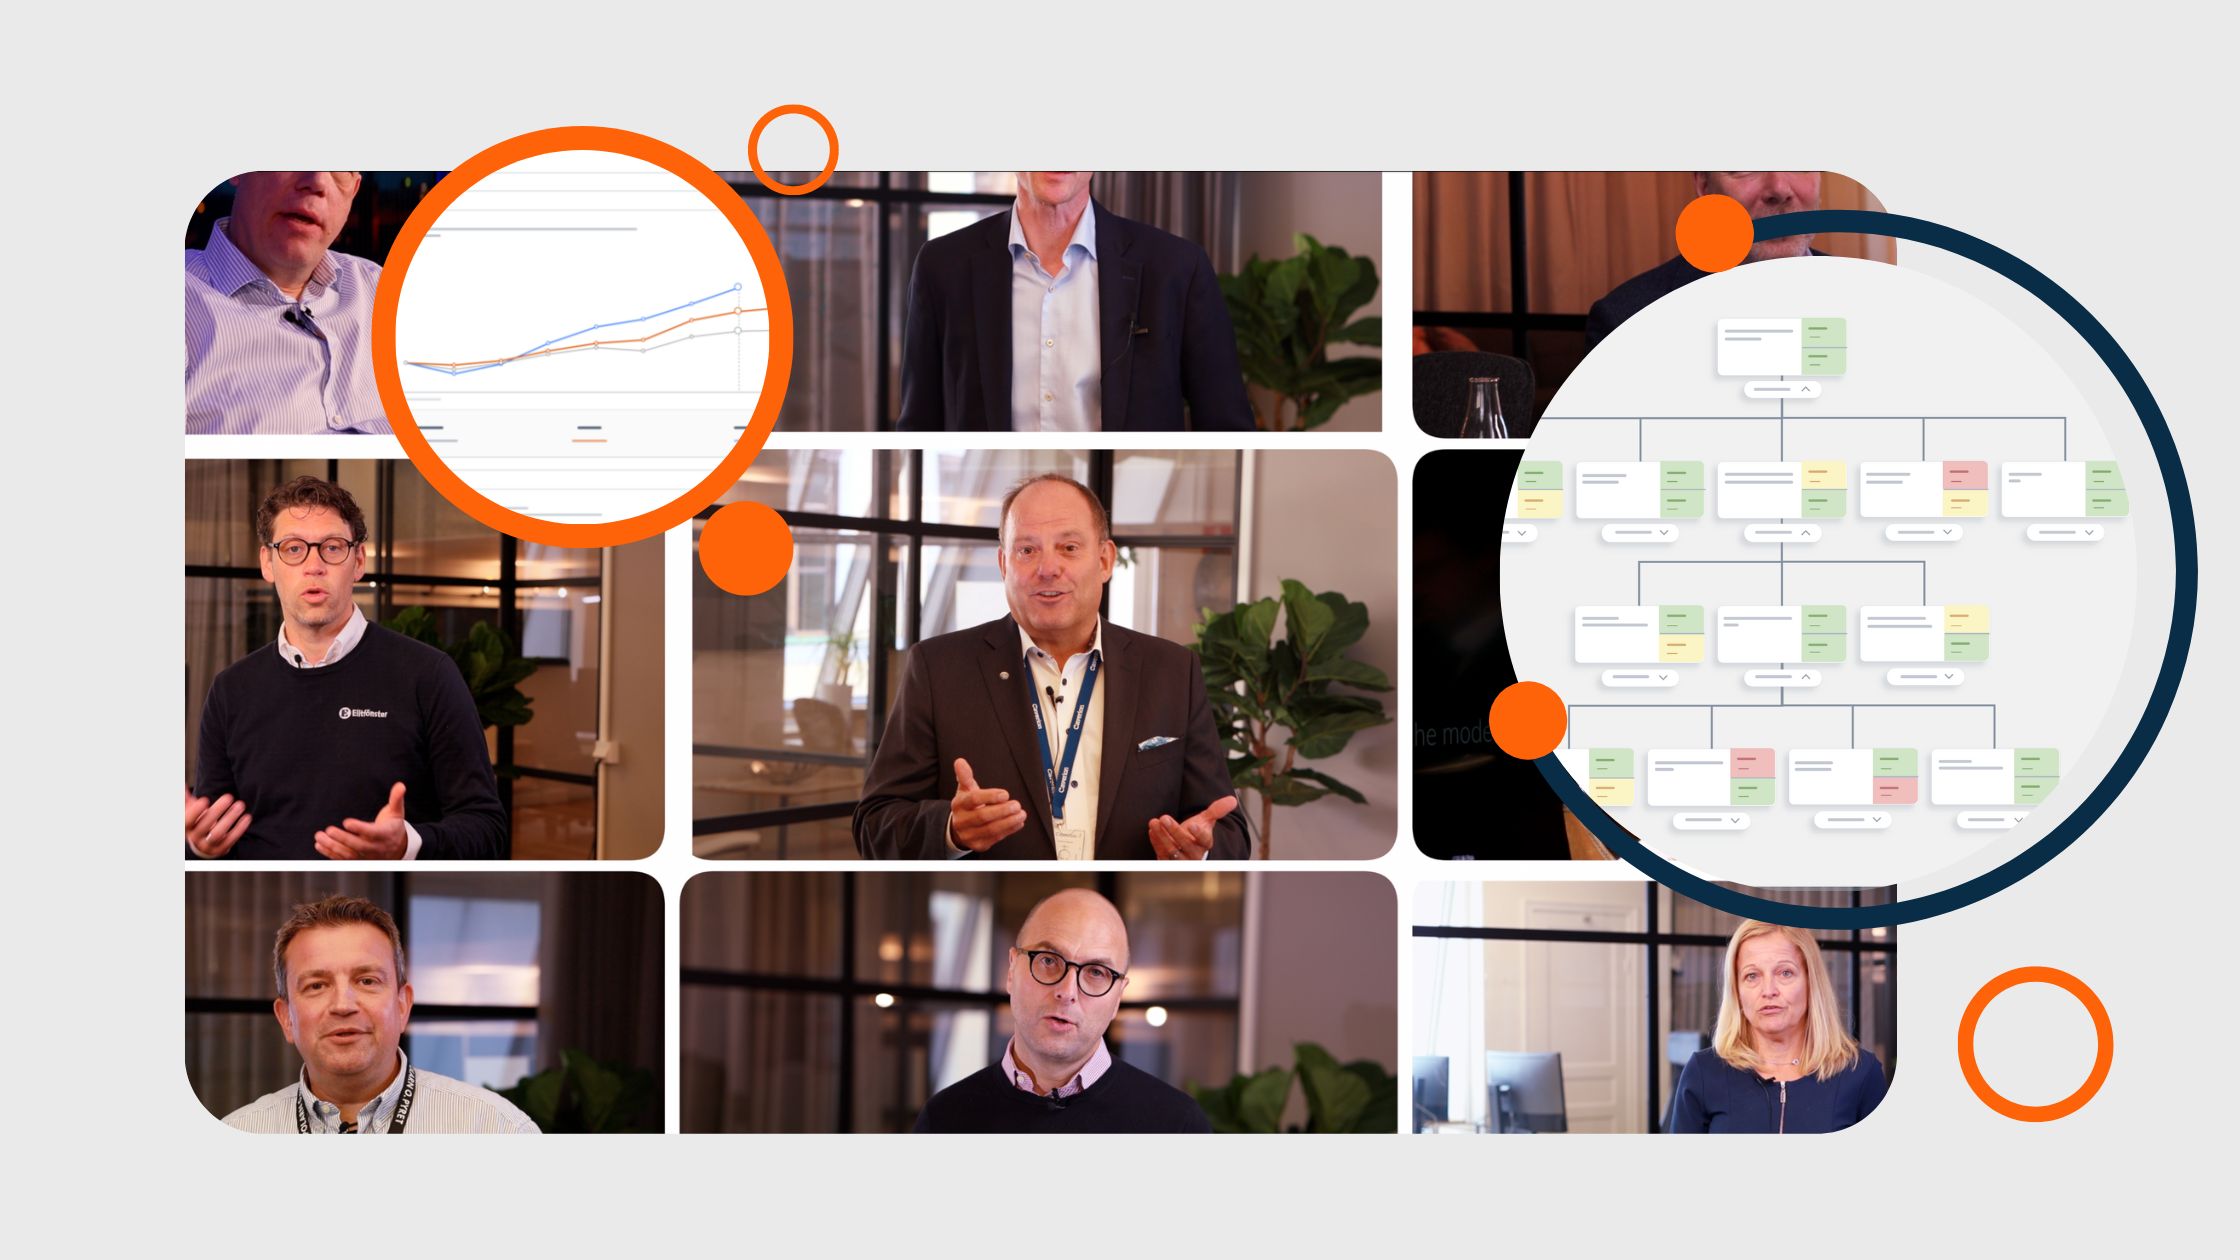 Explore why CEOs at some of the worlds leading companies choose Howwe to accelerate their growth. Click the Play button to watch the video.